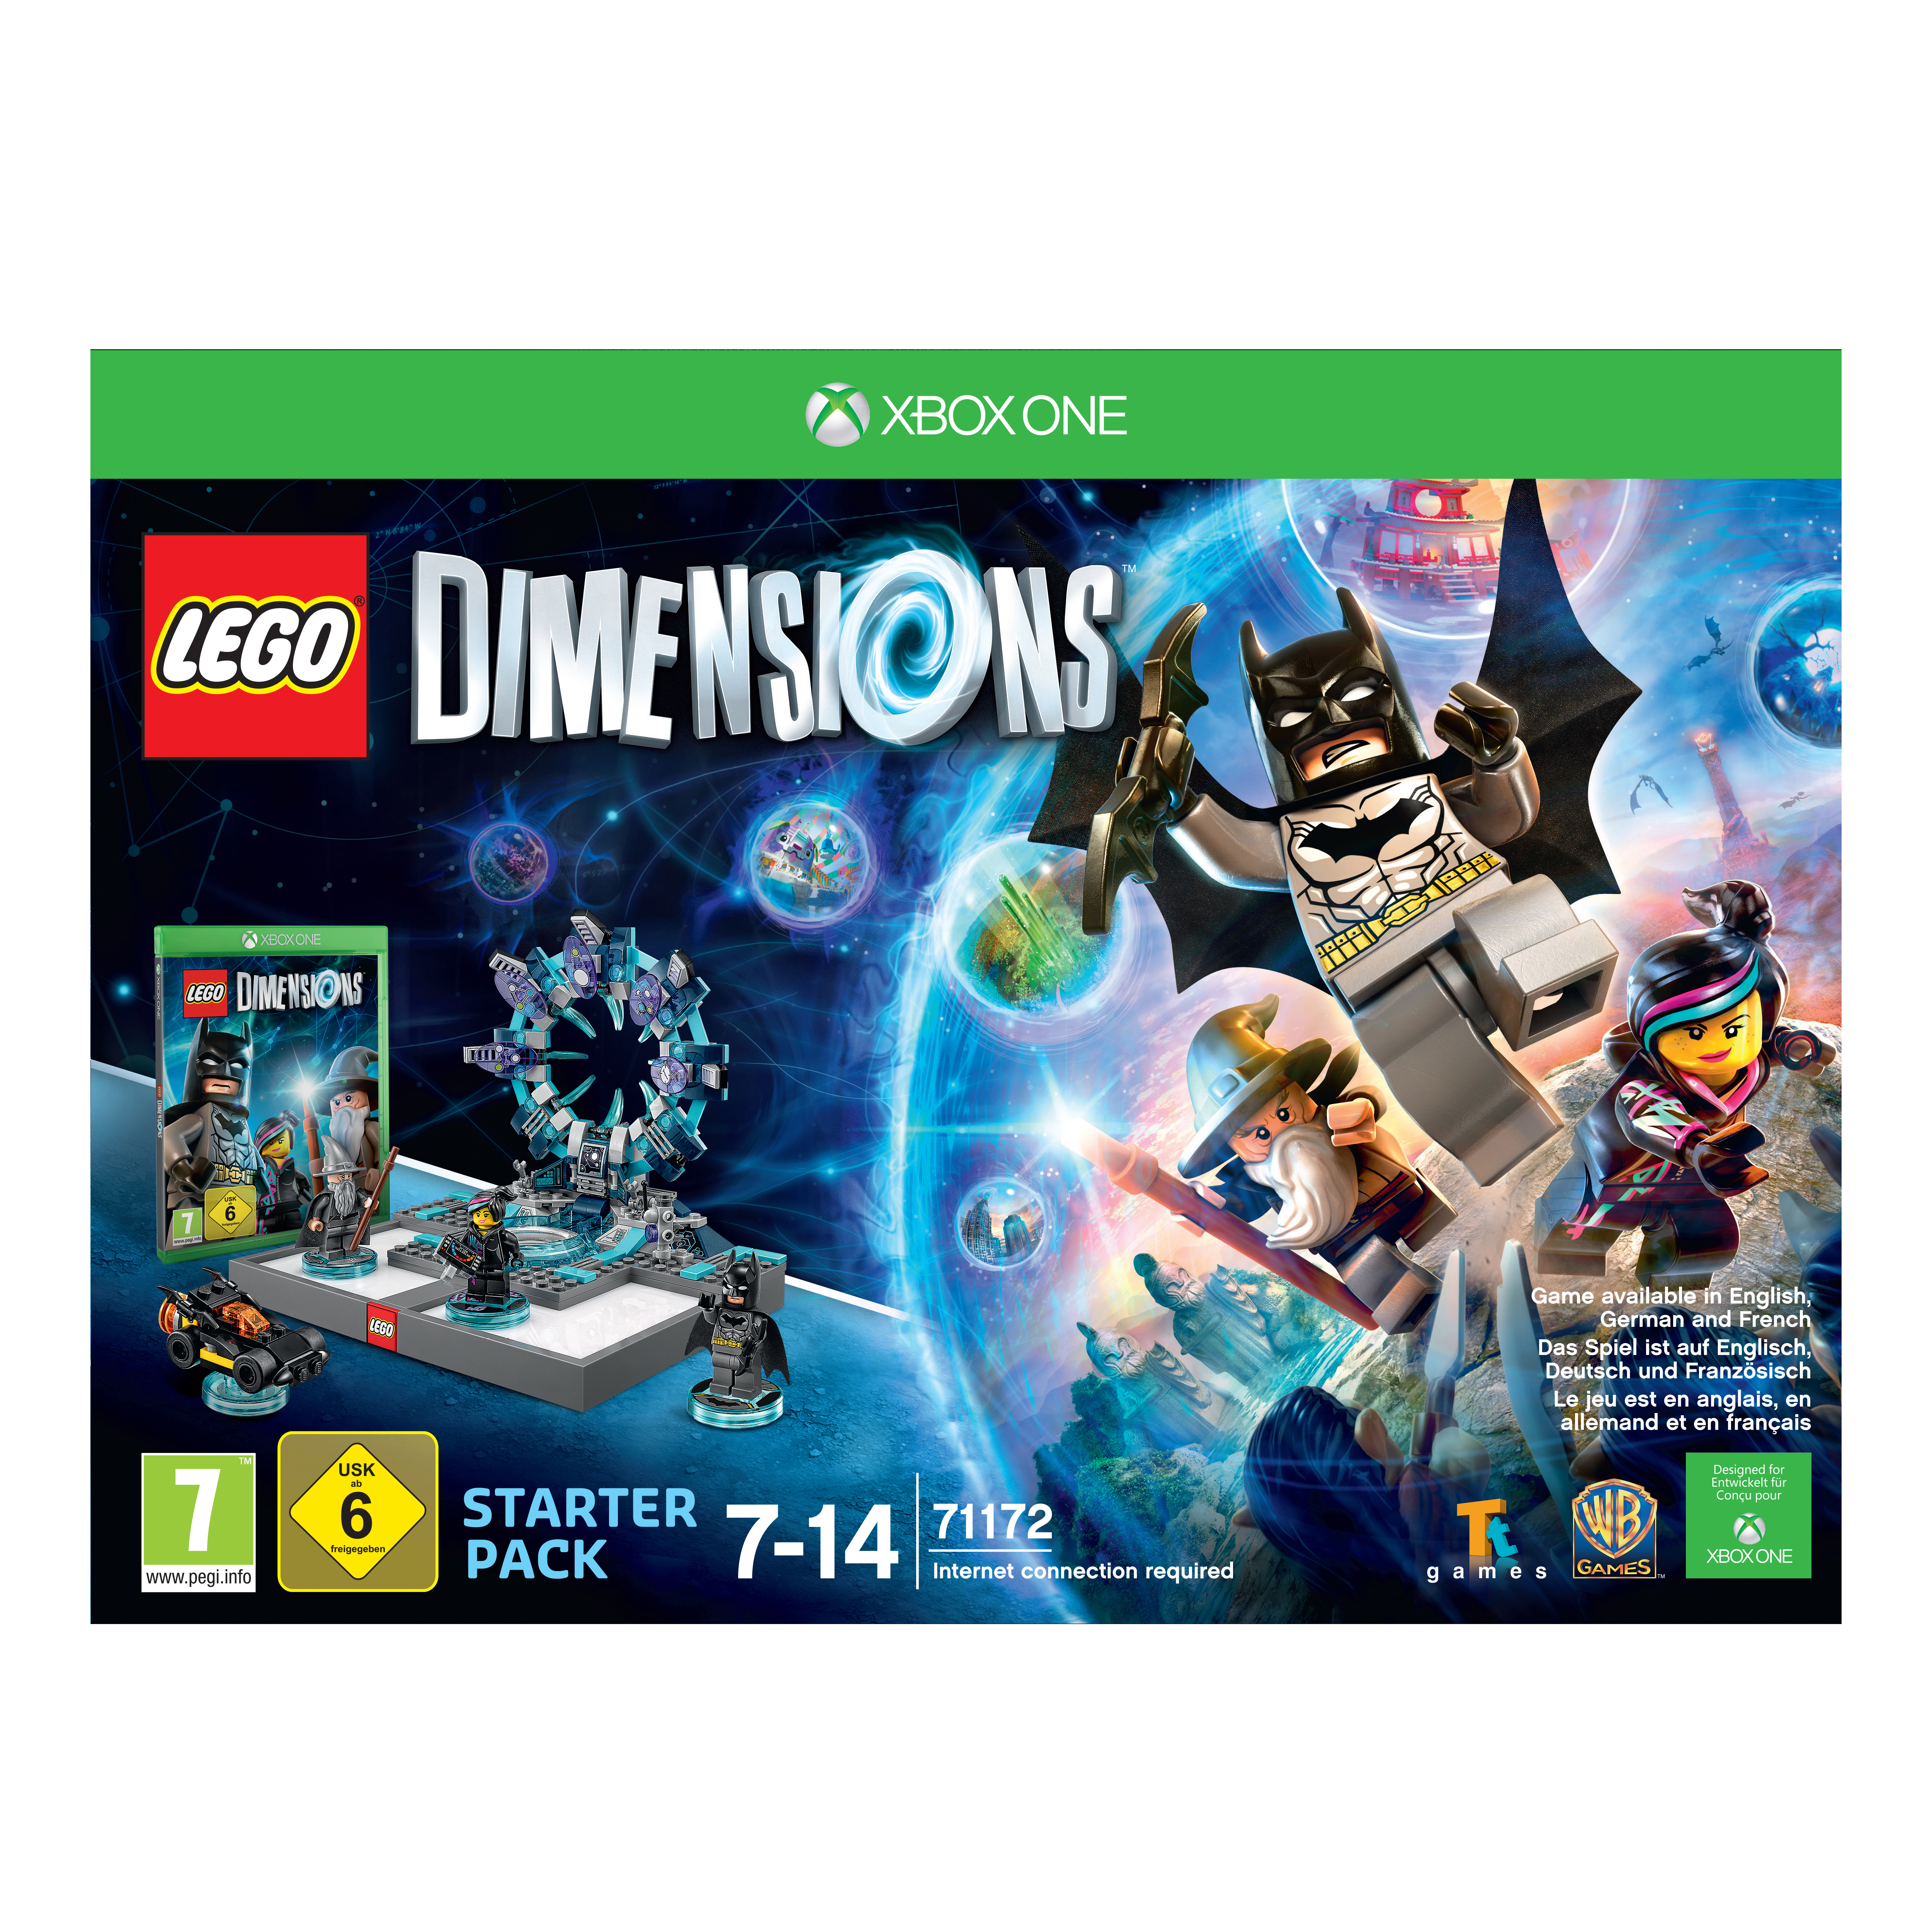 Toy LEGO LEGO Pack Dimensions Smart DIMENSIONS XBOXONE Starter